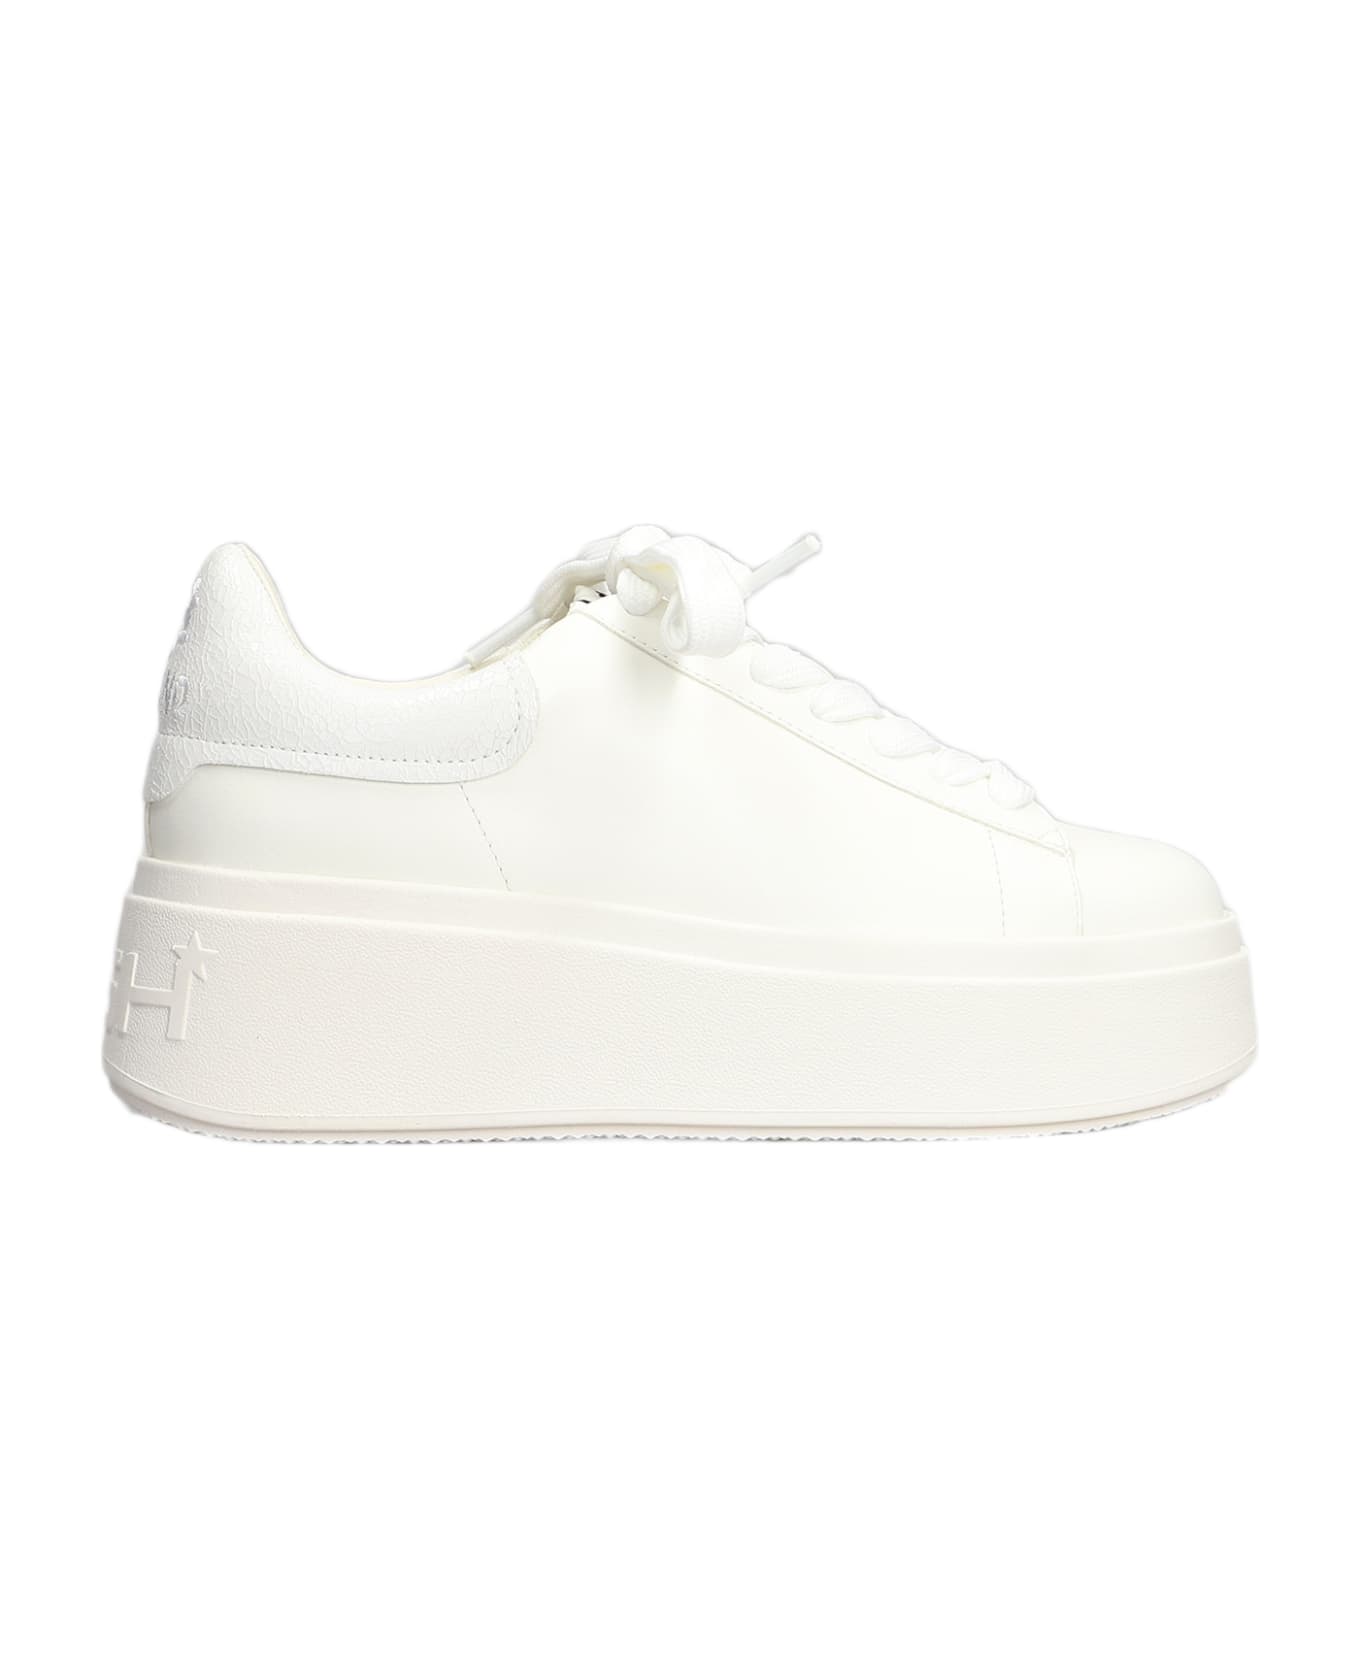 Ash Moby Bekind Sneakers In White Leather - white